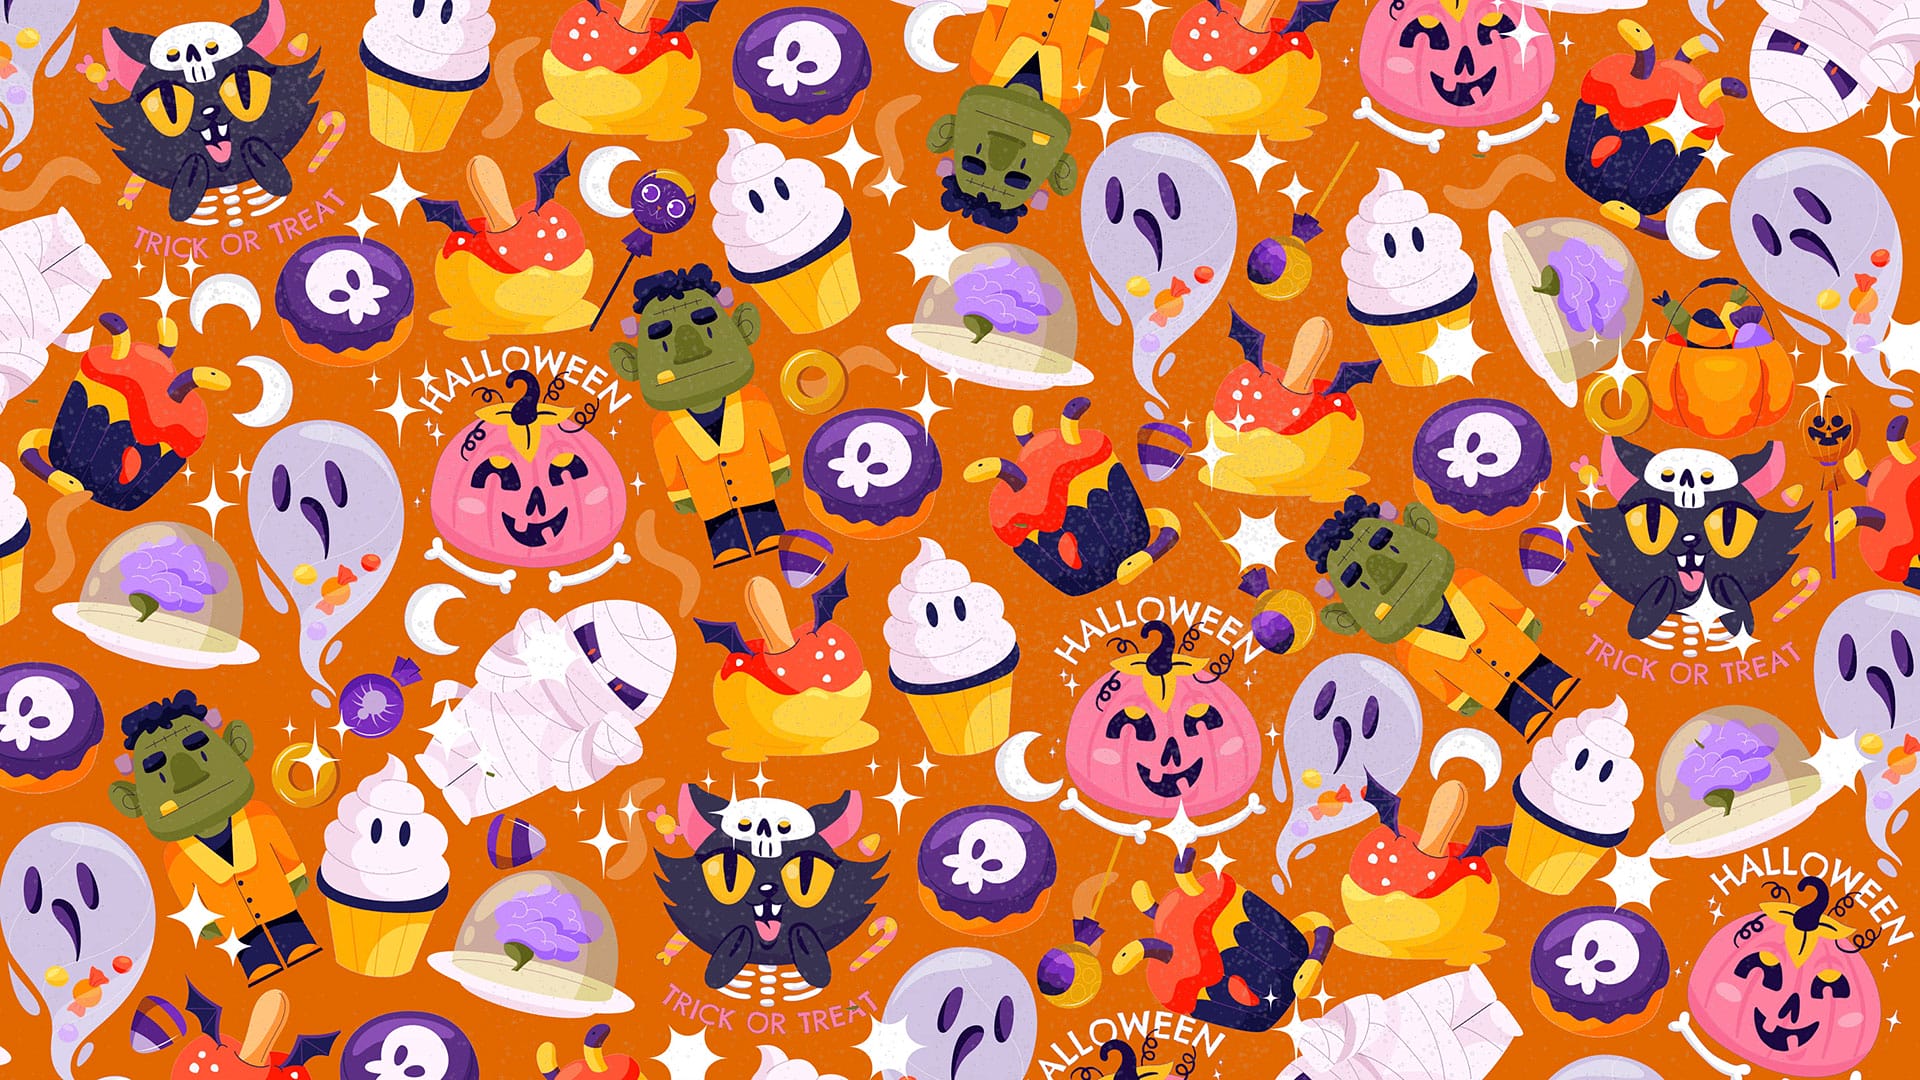 You have 20/20 vision if you spot the pumpkin full of treats among the Halloween decorations in less than 9 seconds